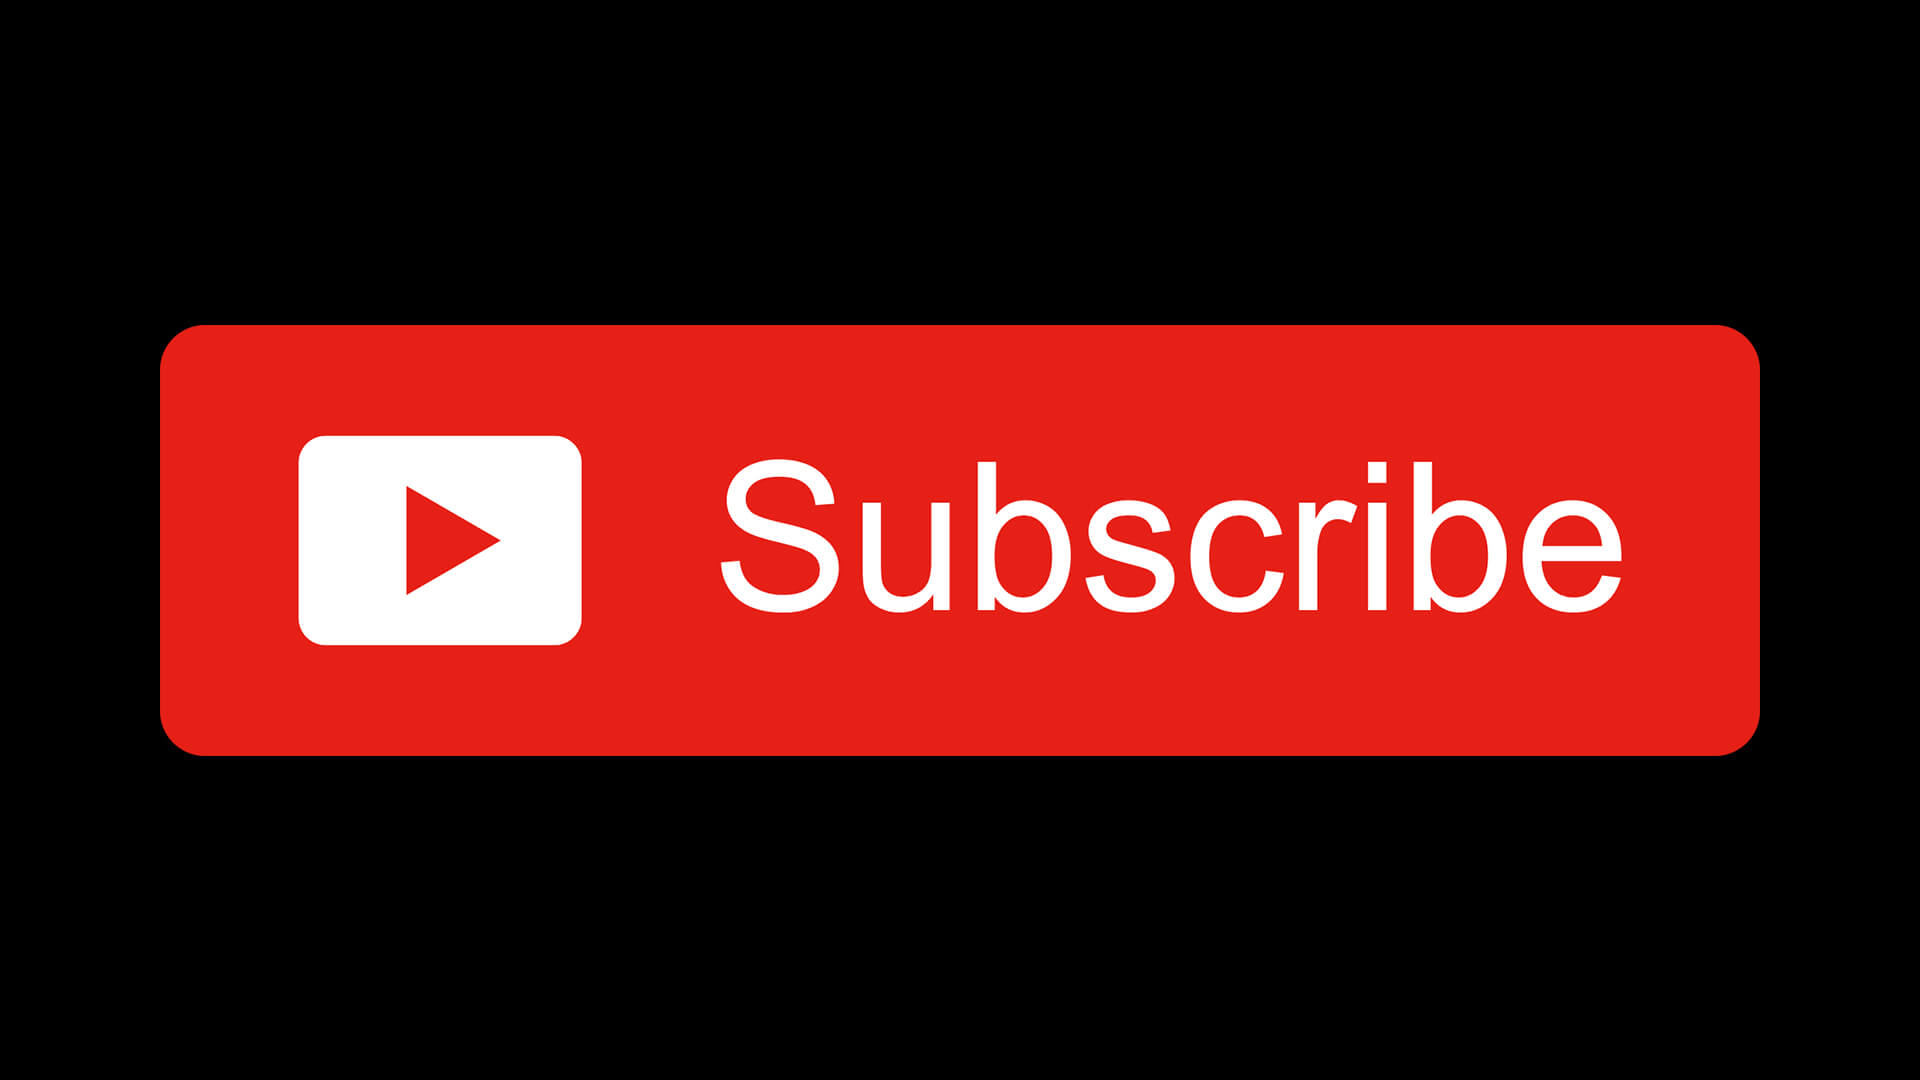 Free YouTube Subscribe Button Download Design Inspiration By AlfredoCreates 8 1